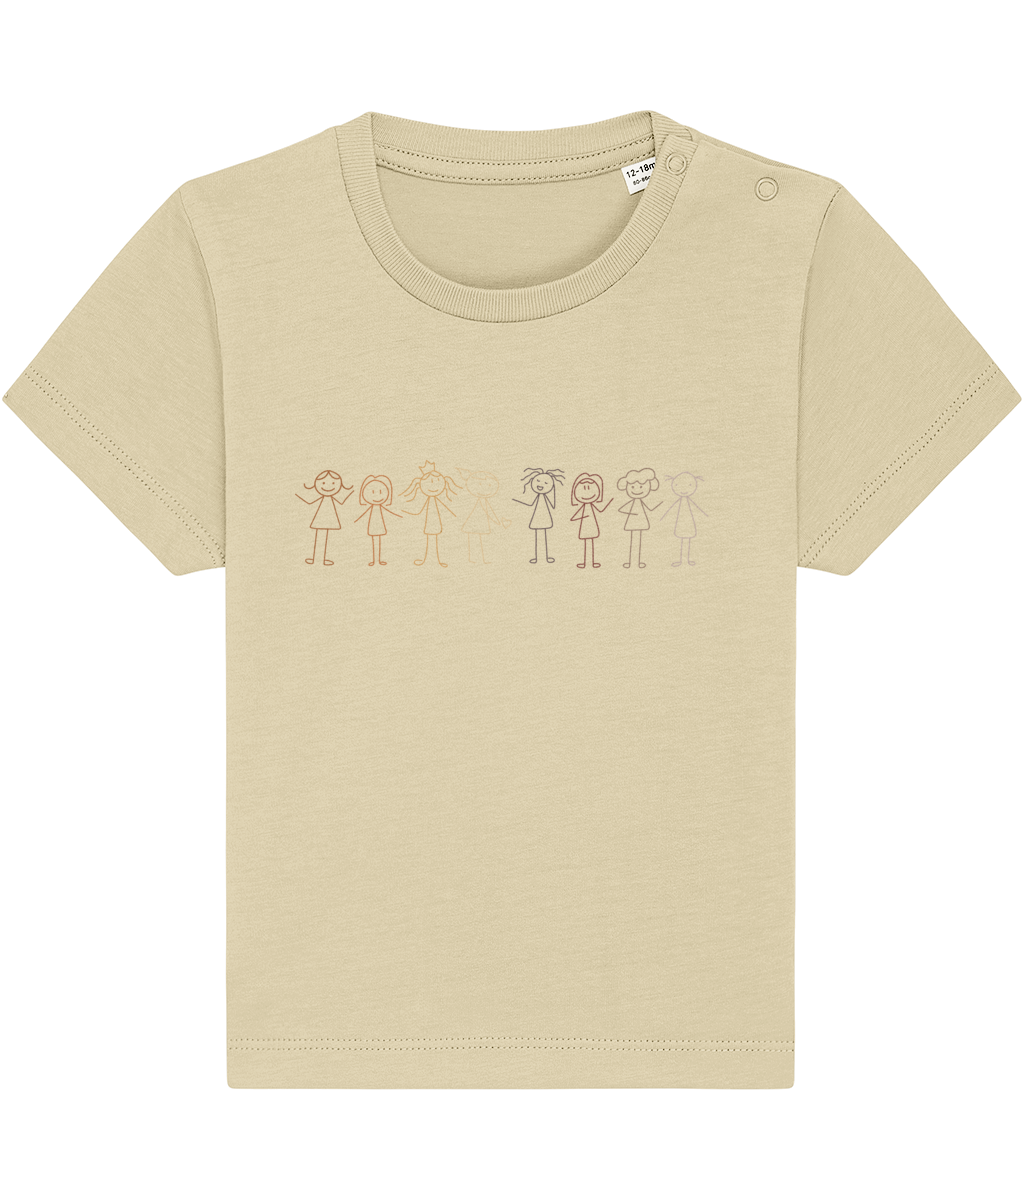 Be Friends Baby Toddler Girl Vegan Organic Cotton T Shirt - Buy any 3 get 10% off